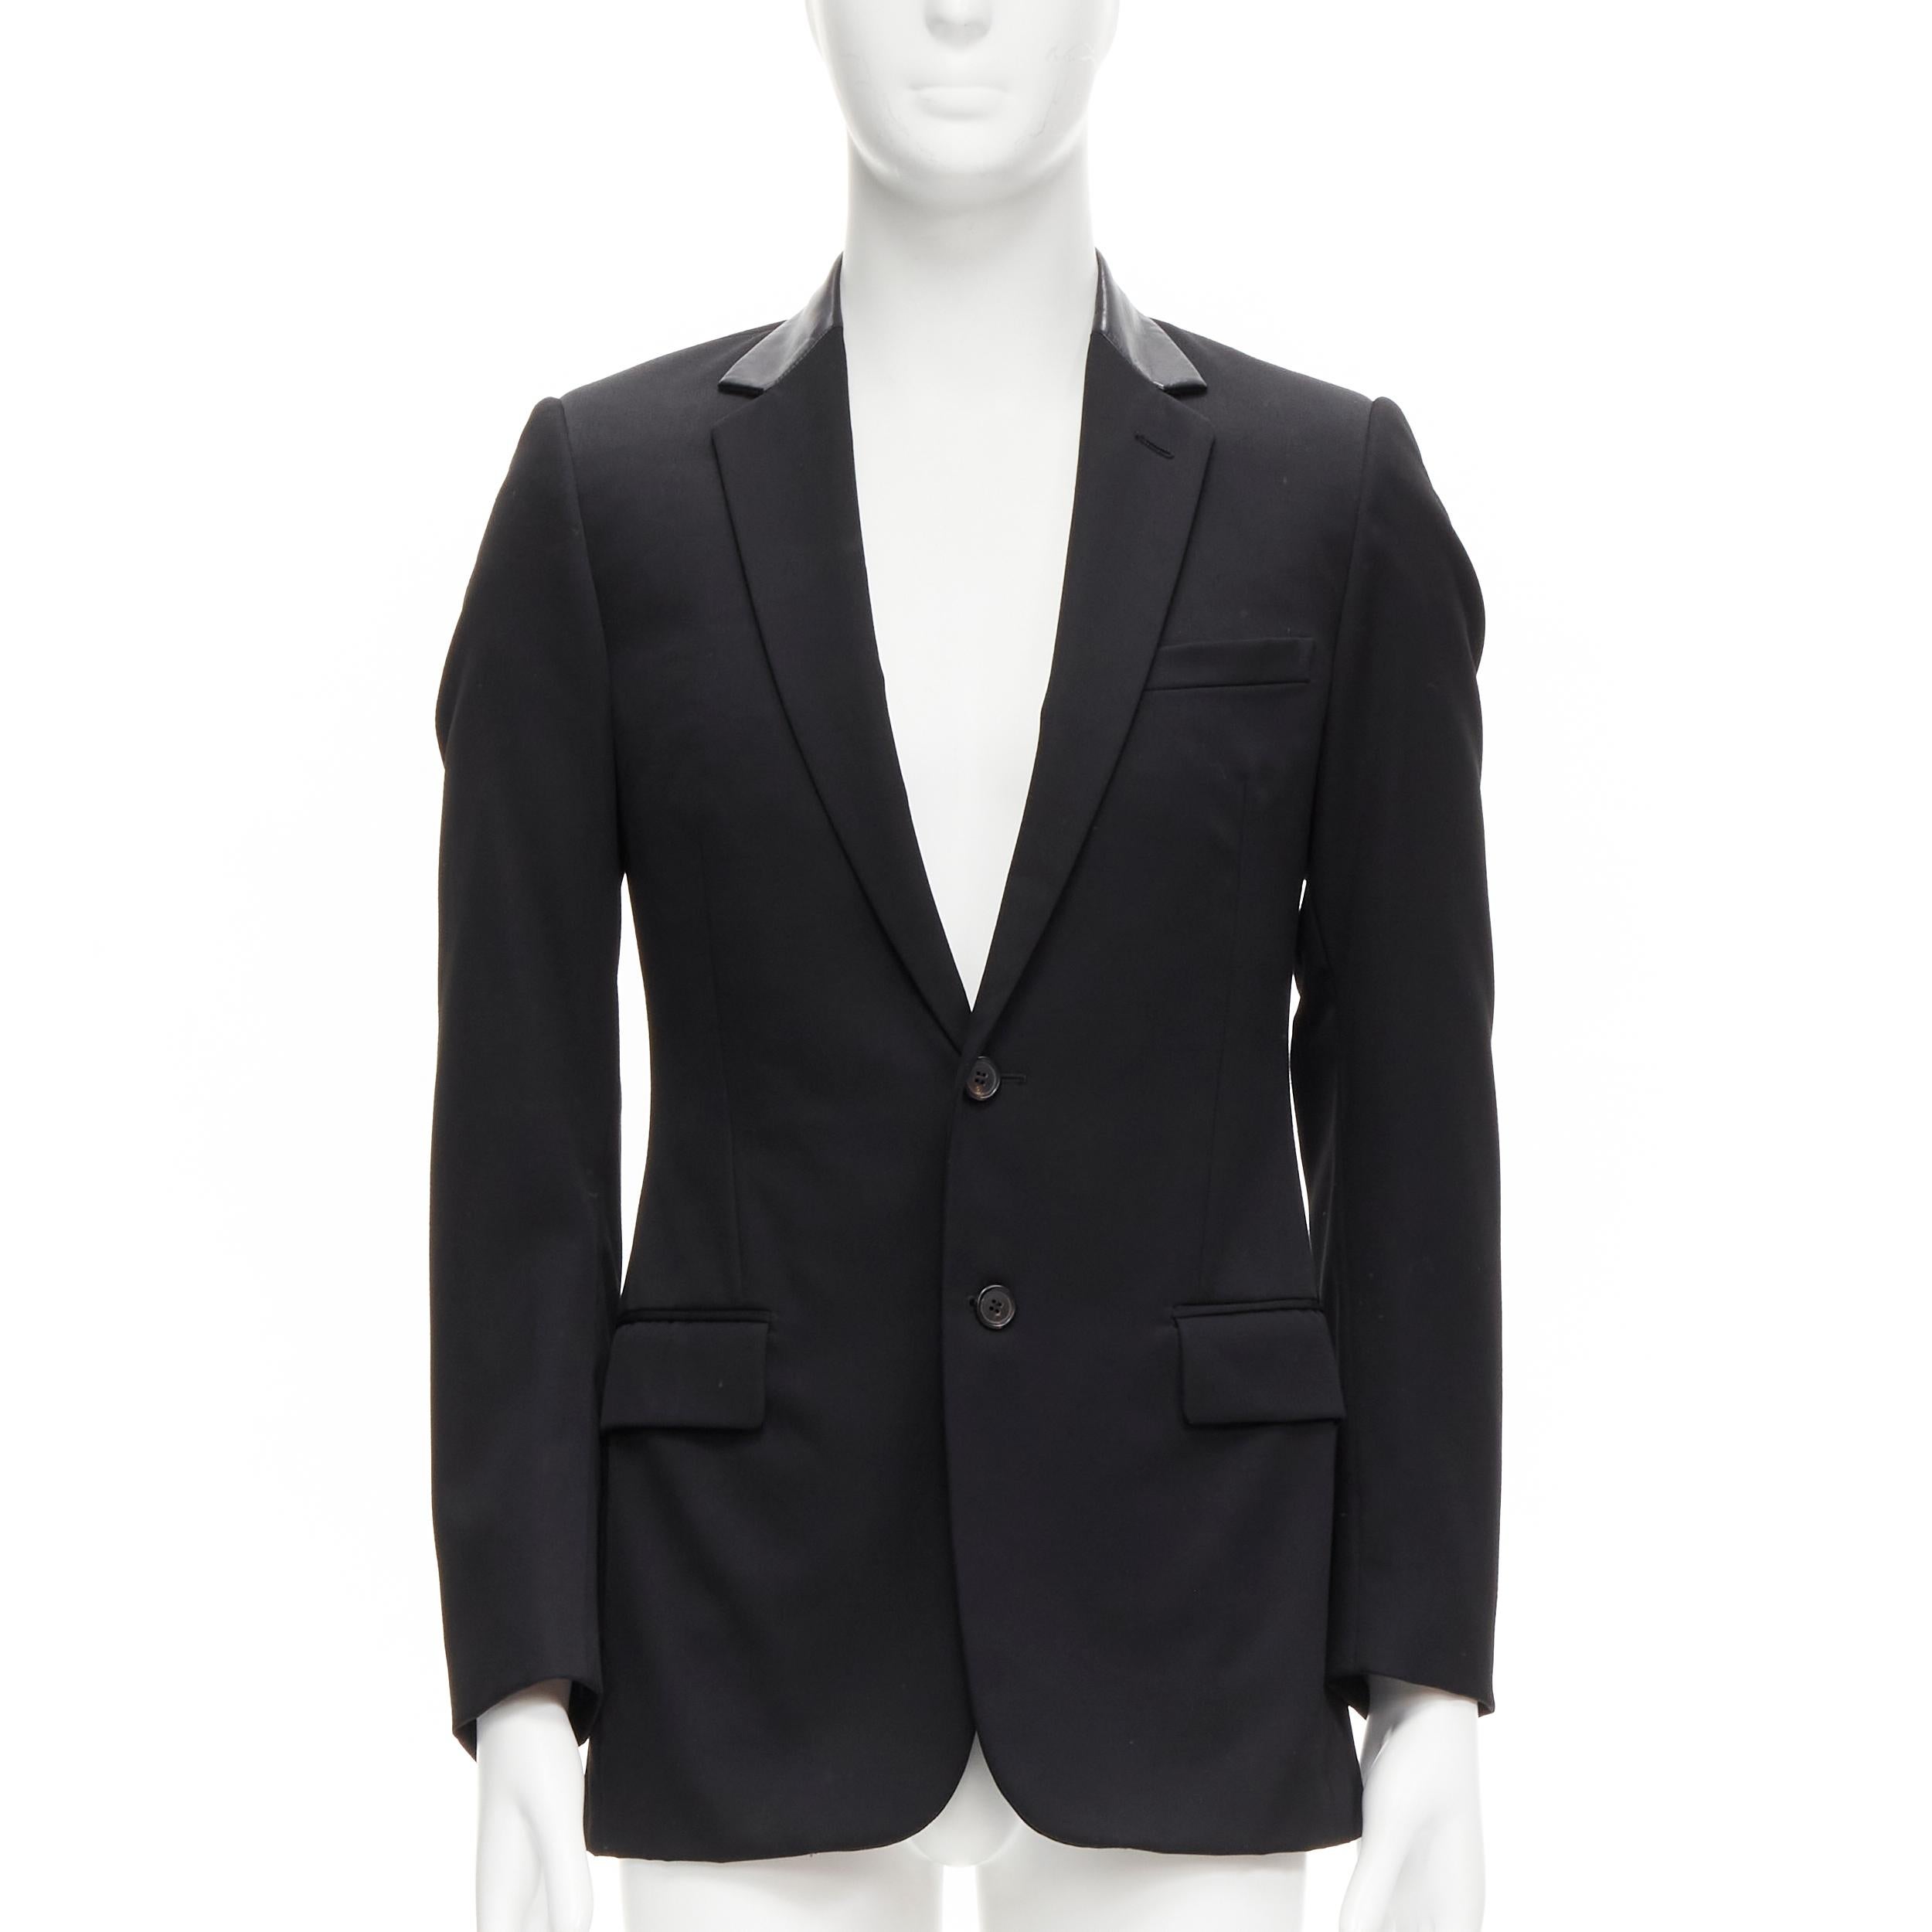 DIOR HOMME Hedi Slimane leather collar classic 2-button blazer jacket FR46 S In Excellent Condition For Sale In Hong Kong, NT